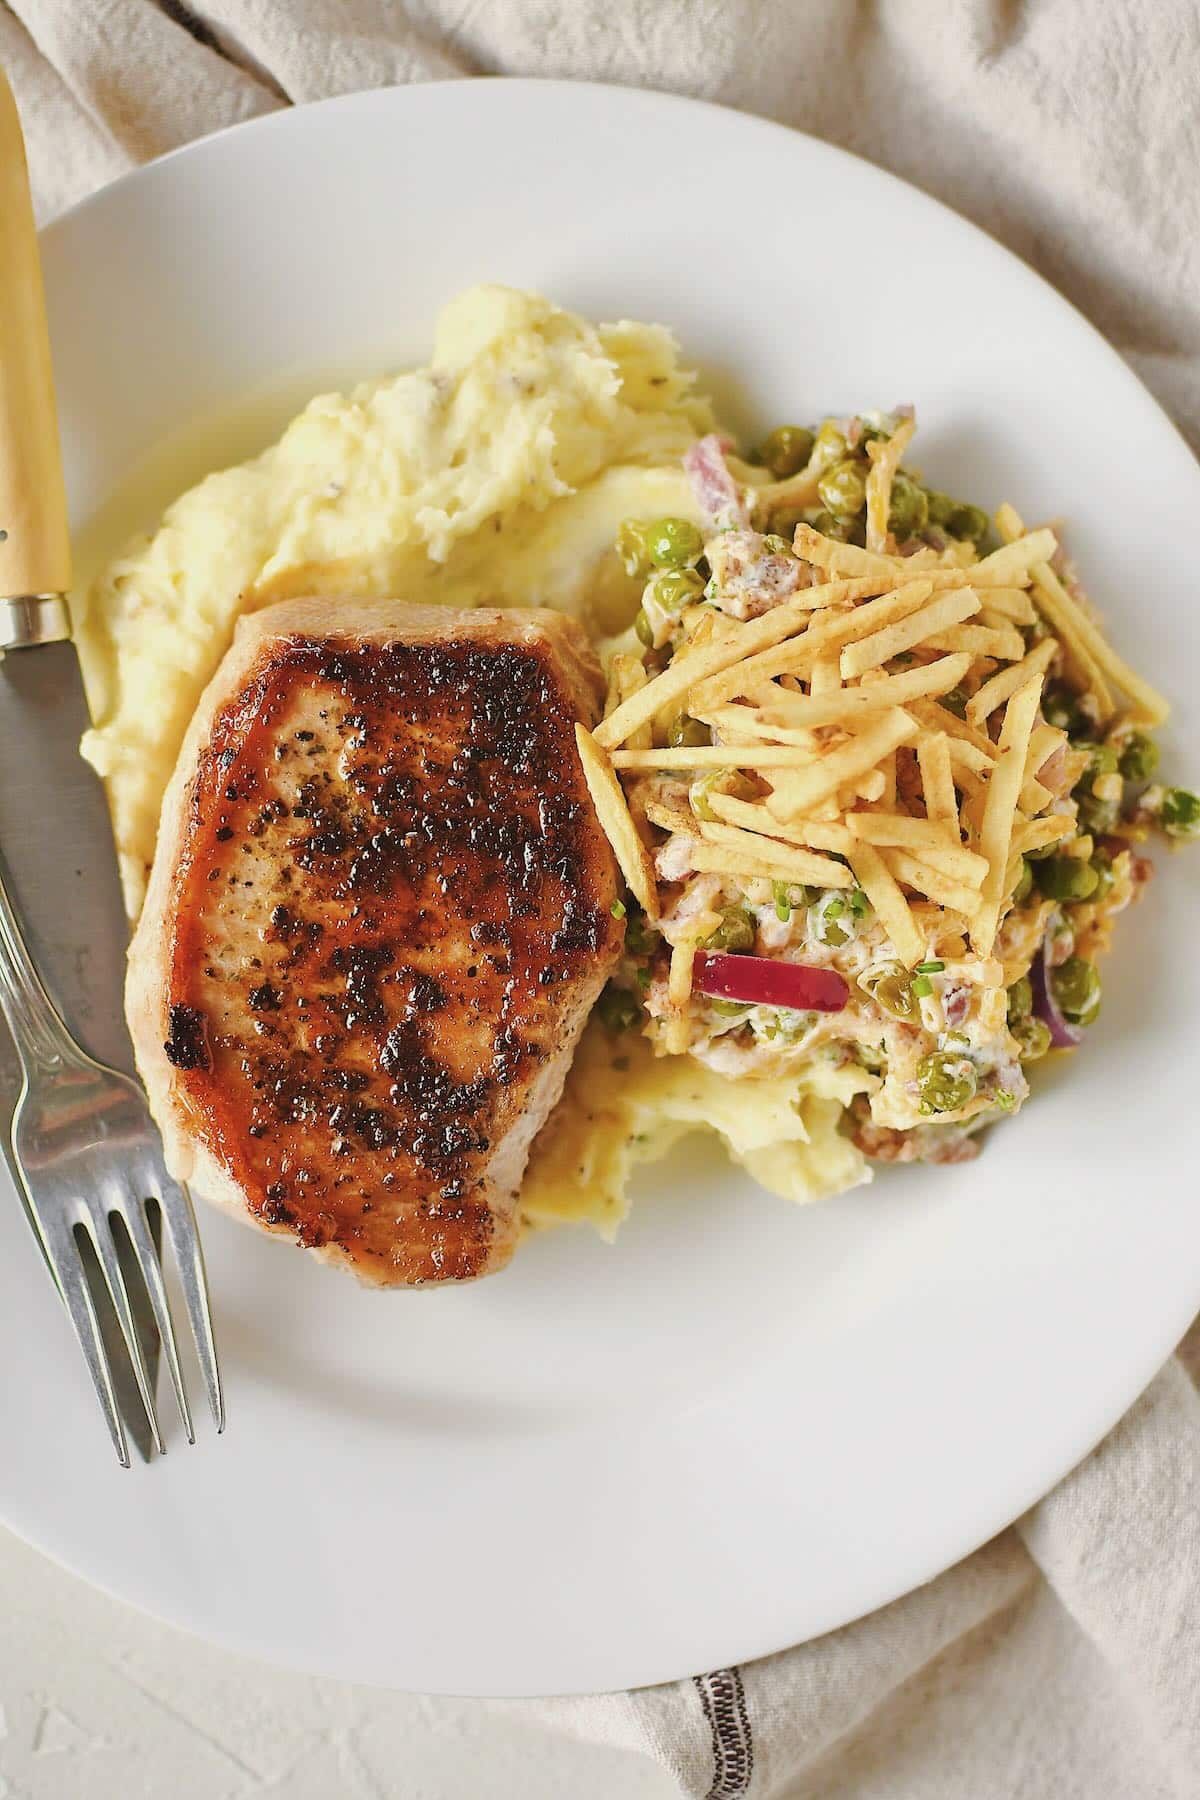 Sous Vide Pork Chop served on a plate with mashed potatoes and pea salad.